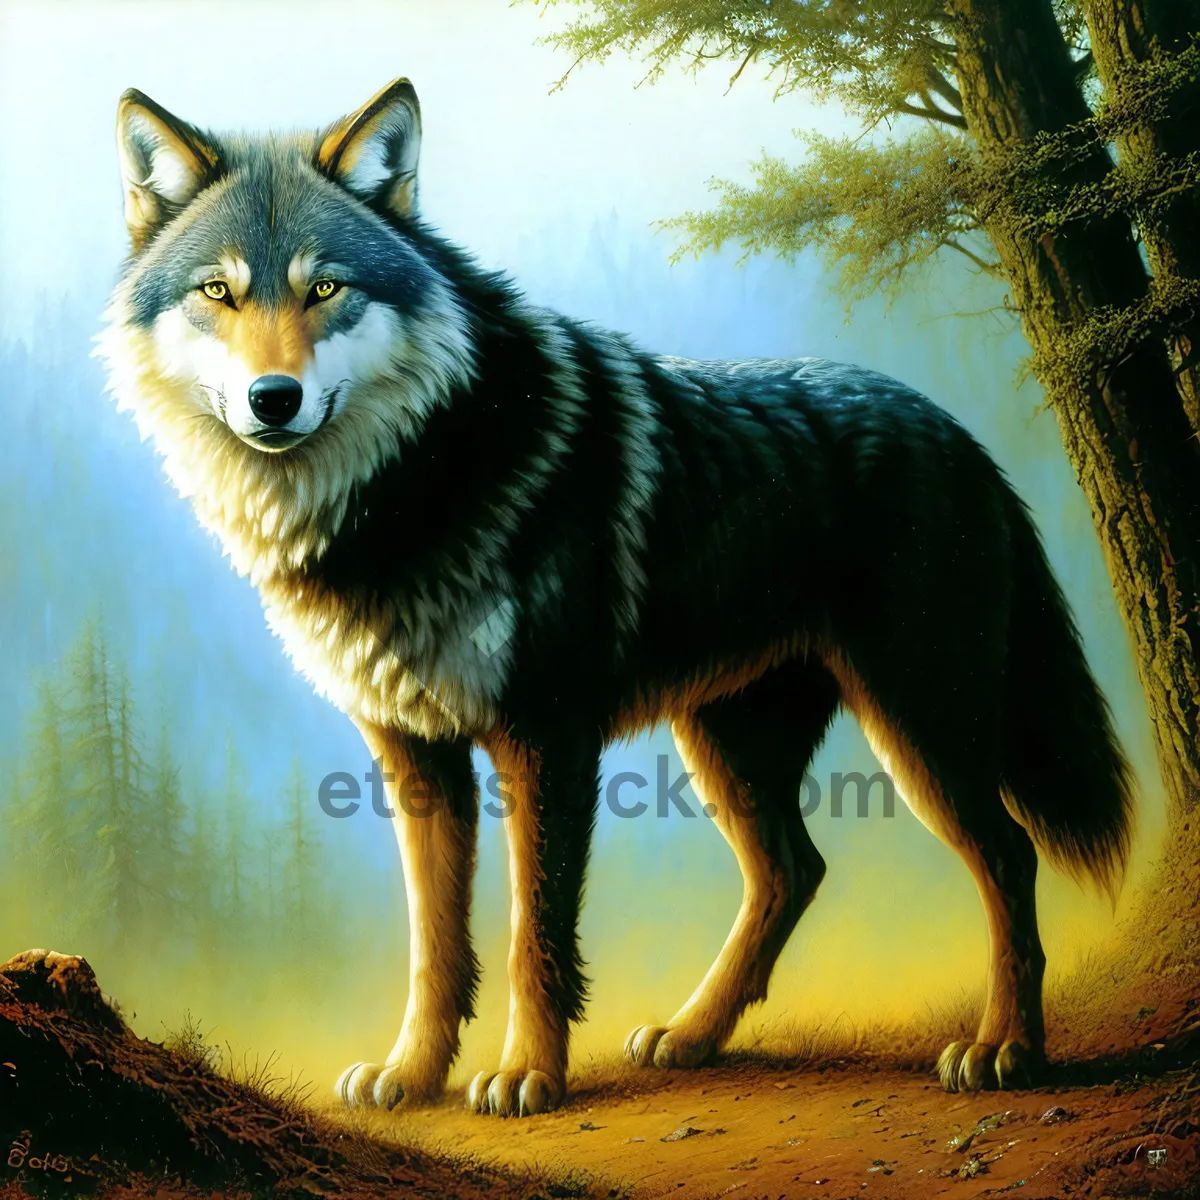 Picture of Wild Timber Wolf - Majestic Canine Predator in the Wilderness.